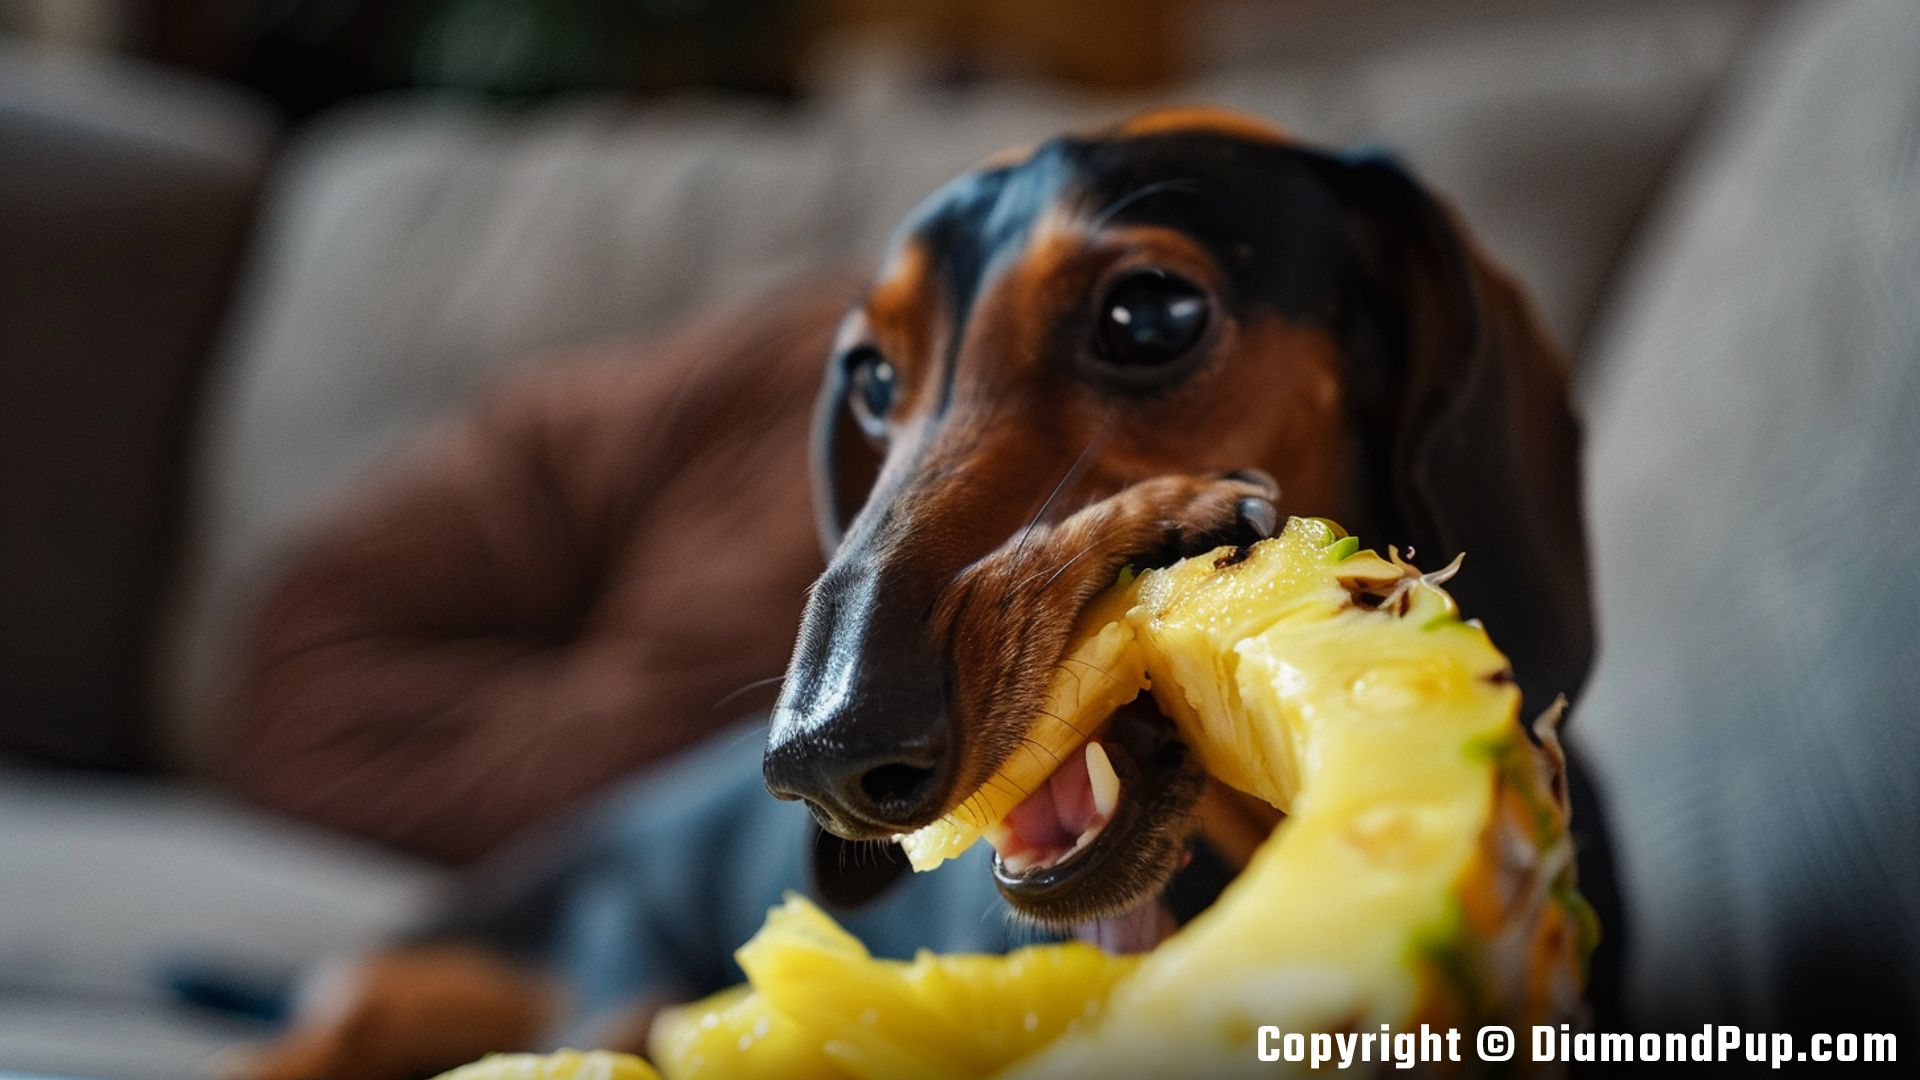 Image of an Adorable Dachshund Snacking on Pineapple